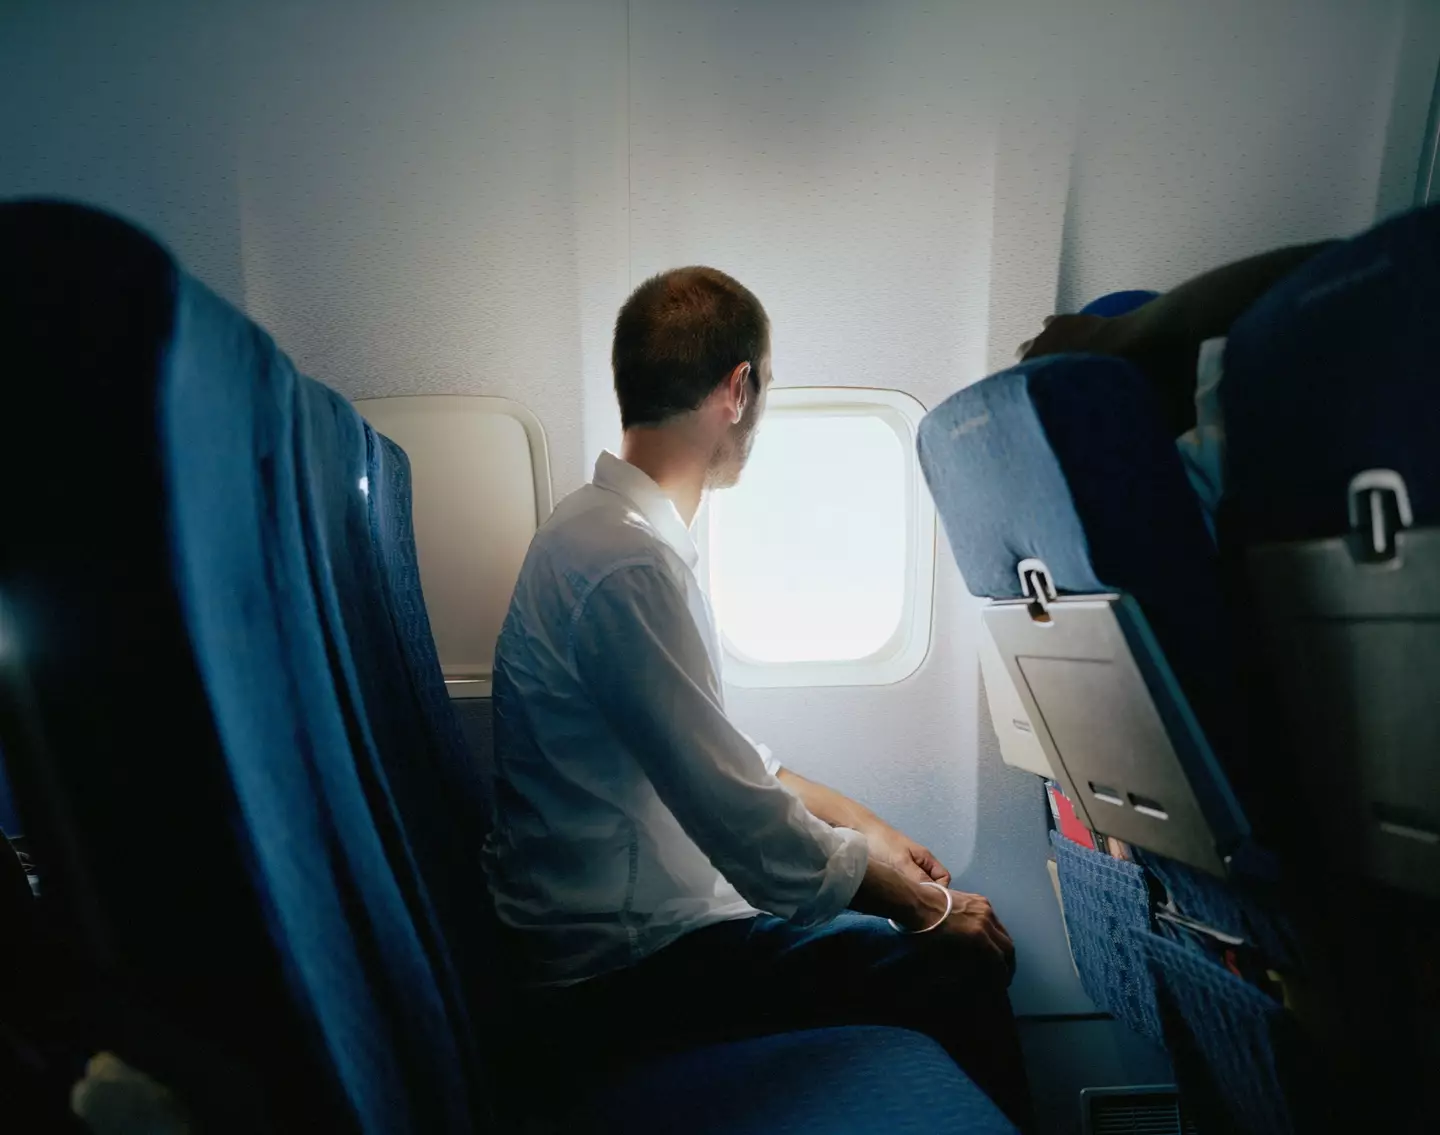 People love the window seat. (Getty Stock Images)